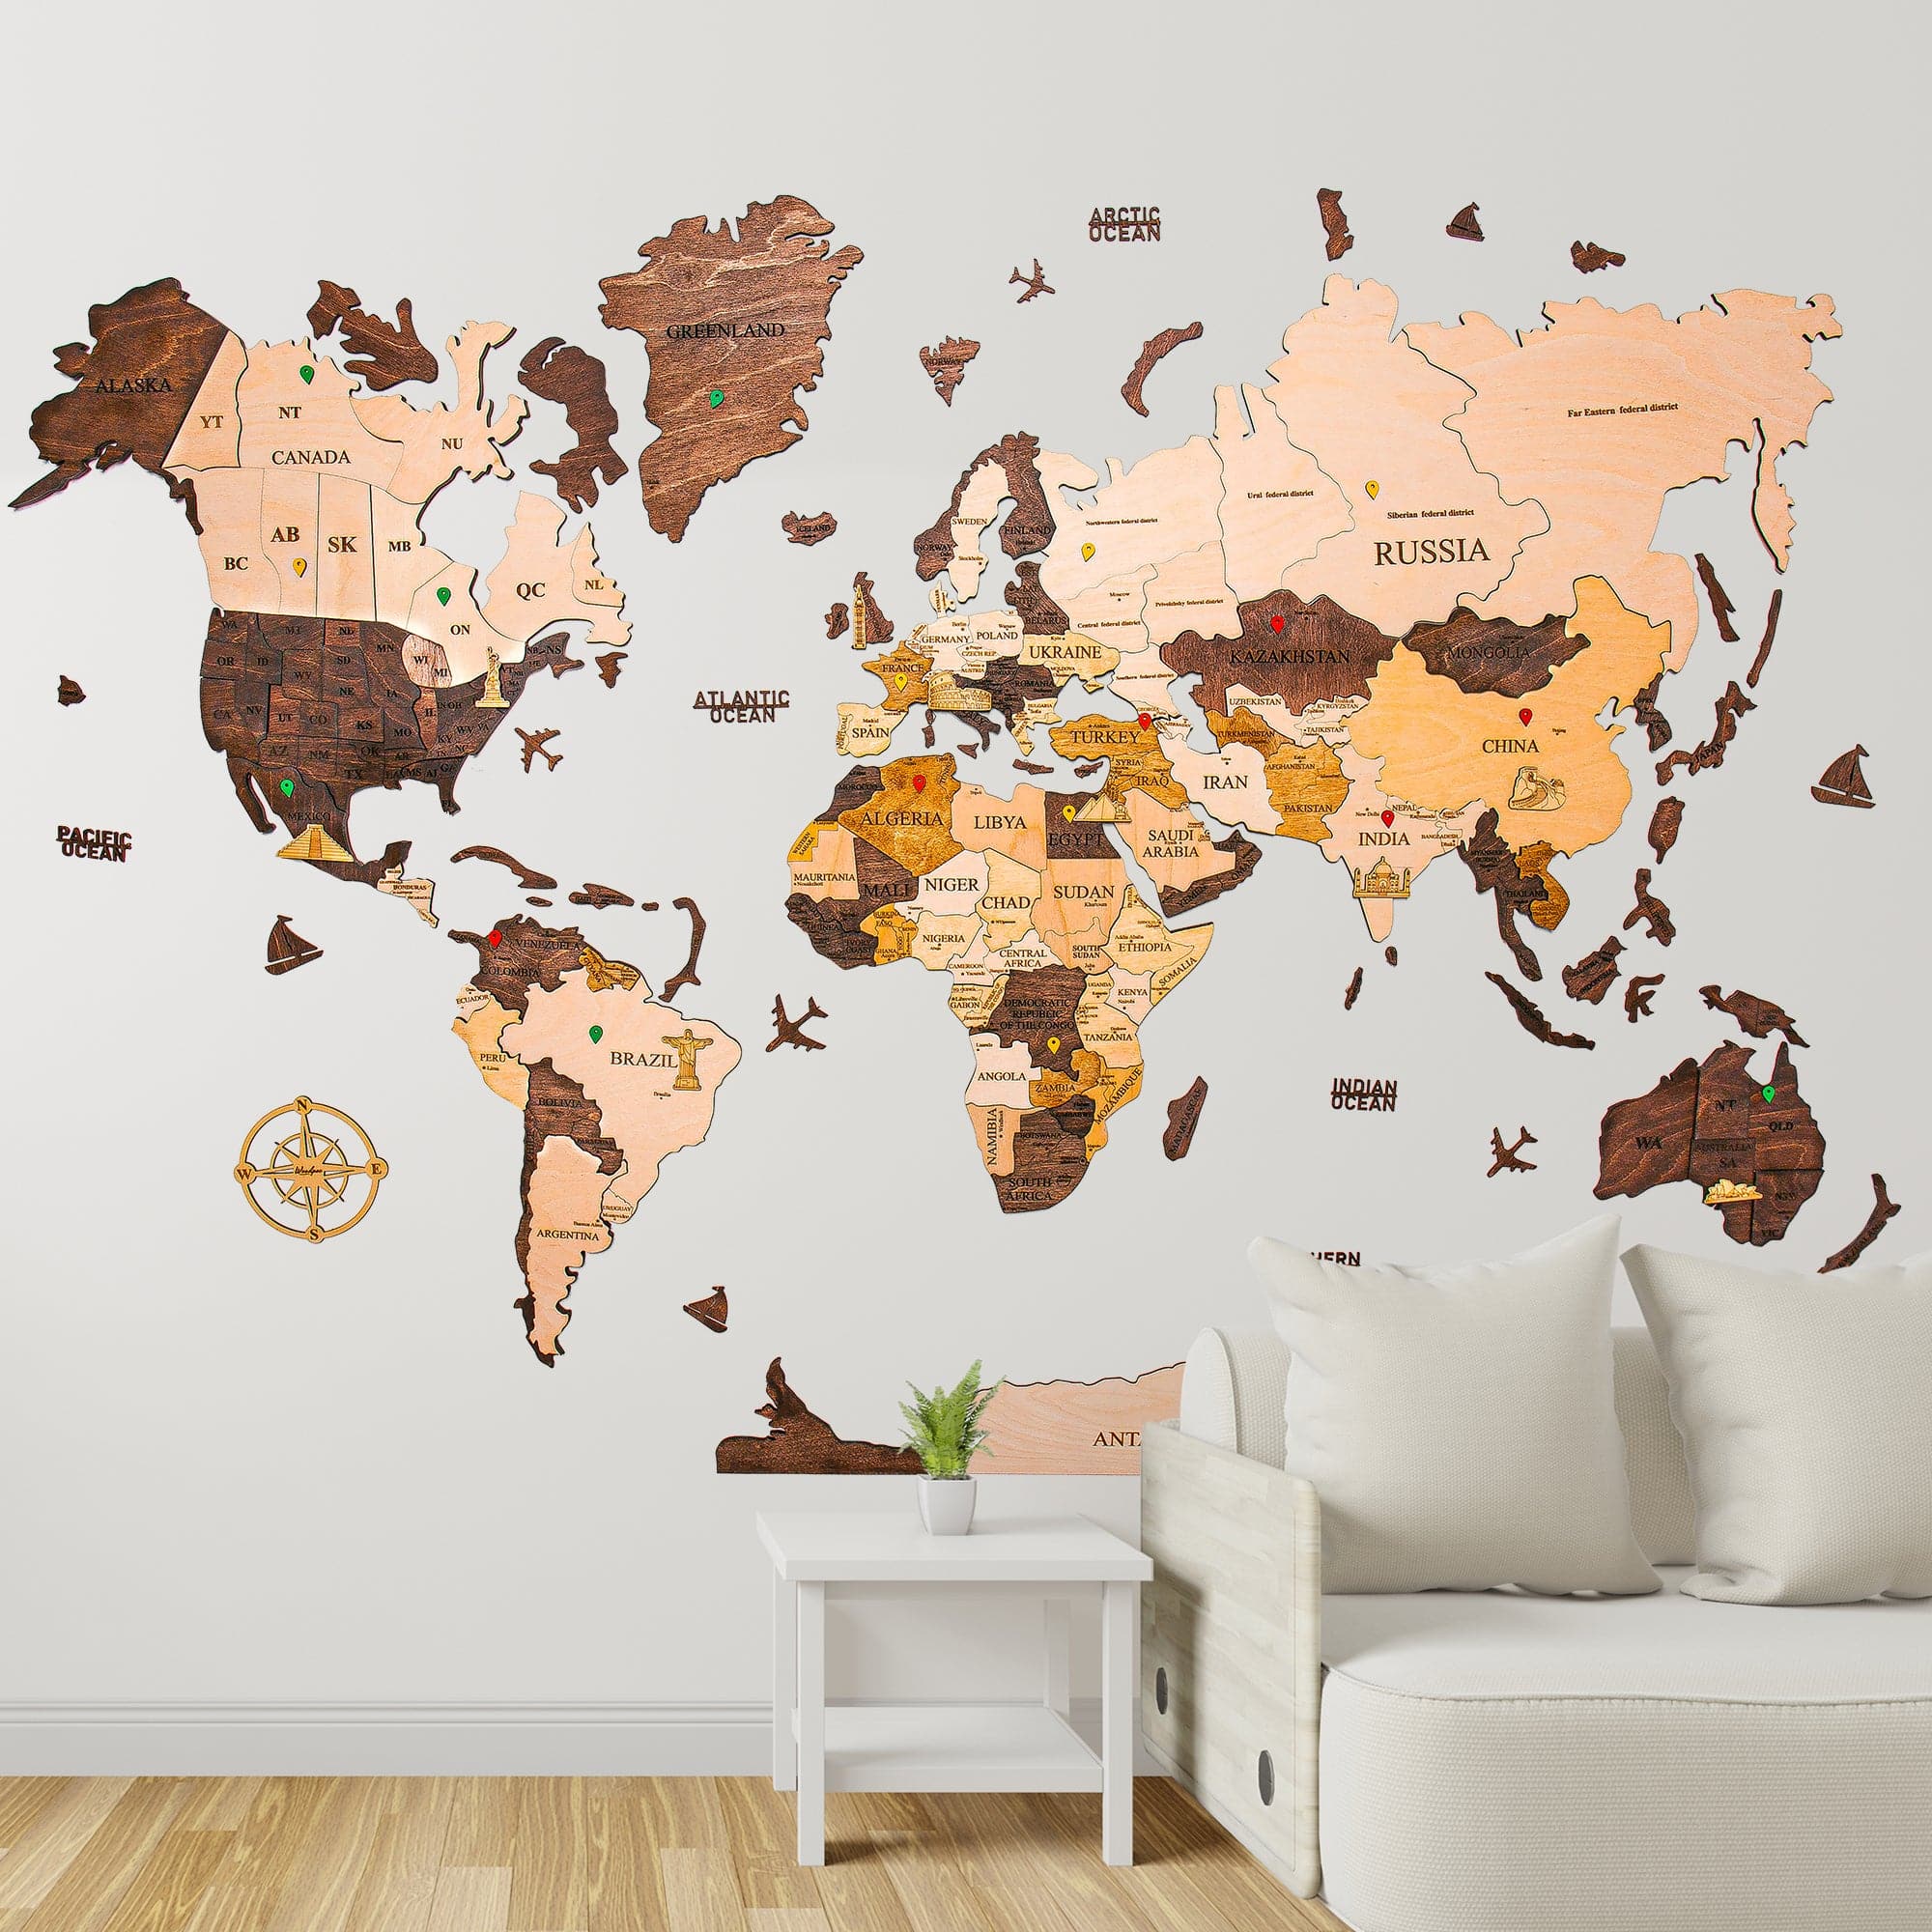 3D Wooden World Map - Multicolored 04 L Full Pack